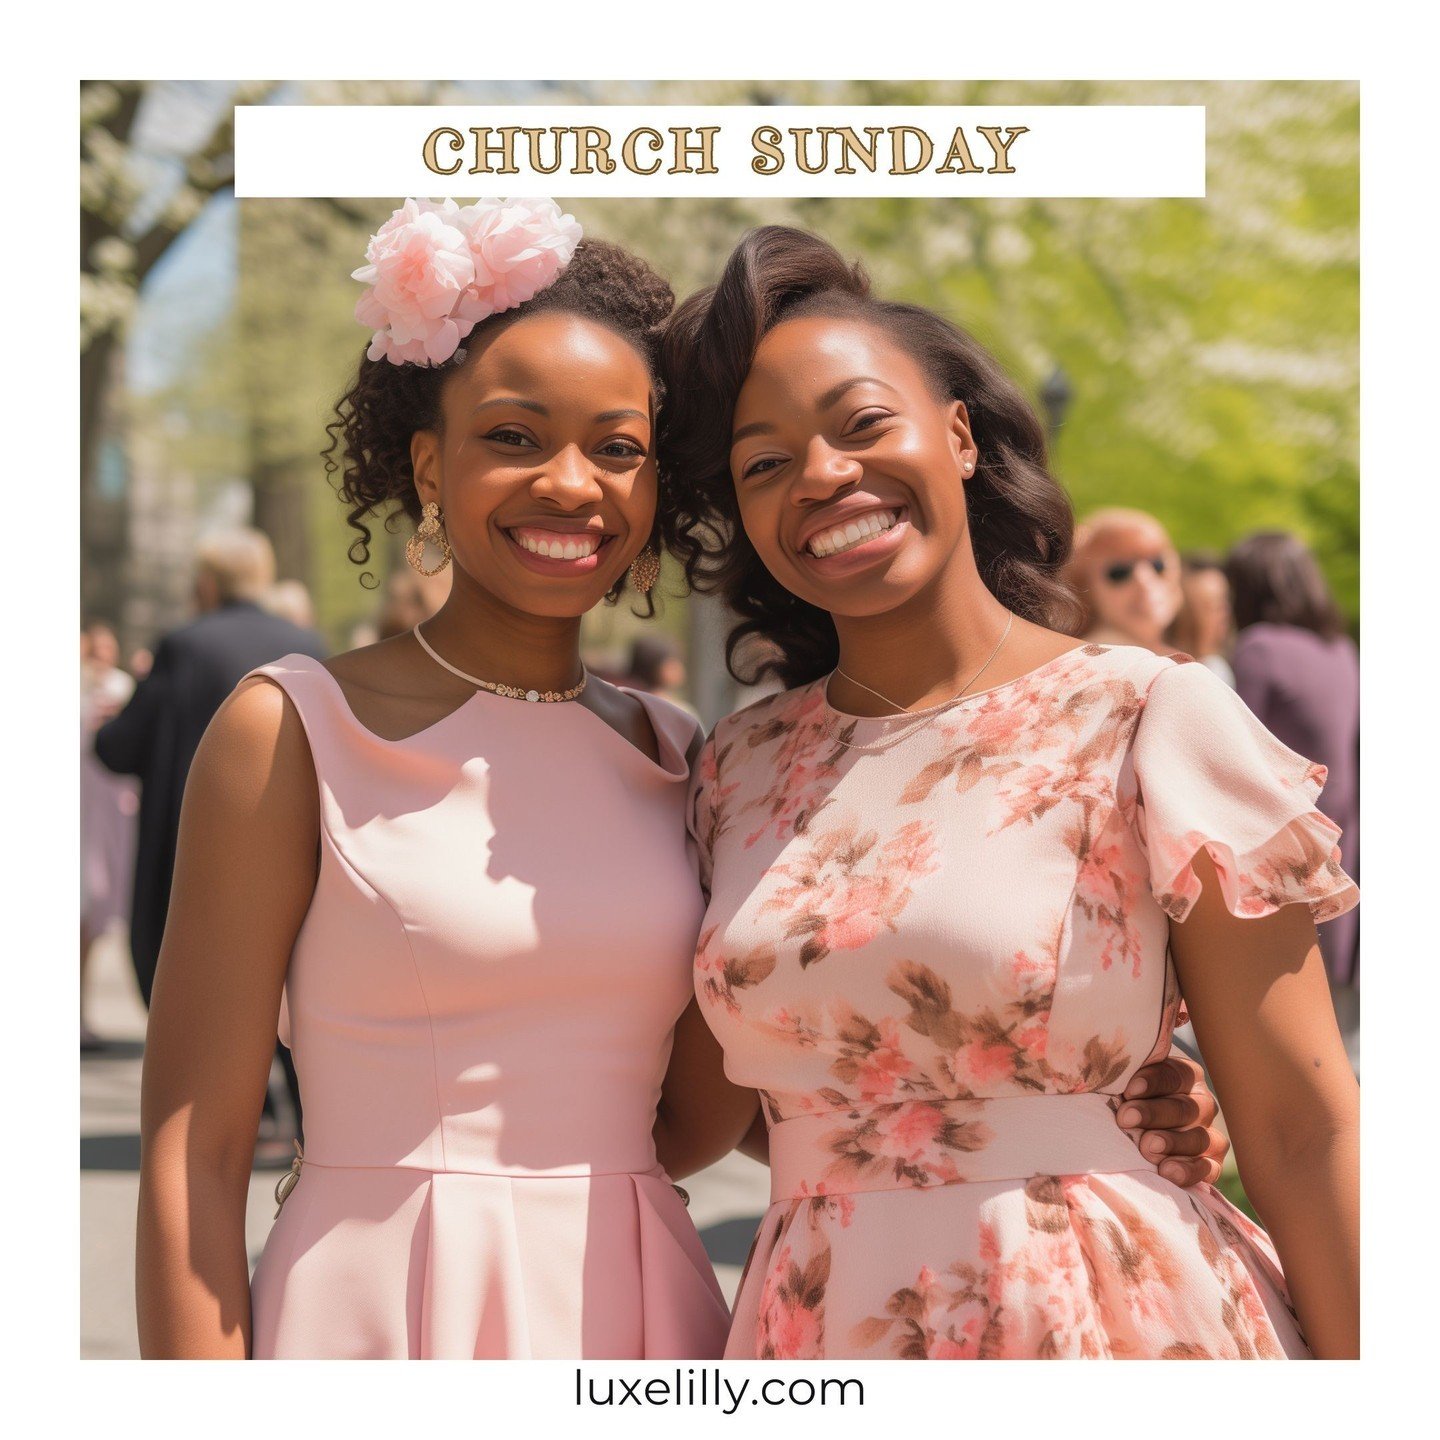 Step into the warm embrace of sisterhood with our Church Girl Sunday reflections on the She Believes blog. Join us in reminiscing about treasured memories and celebrating the bonds of faith that unite us. Let's honor the legacy of love and friendship